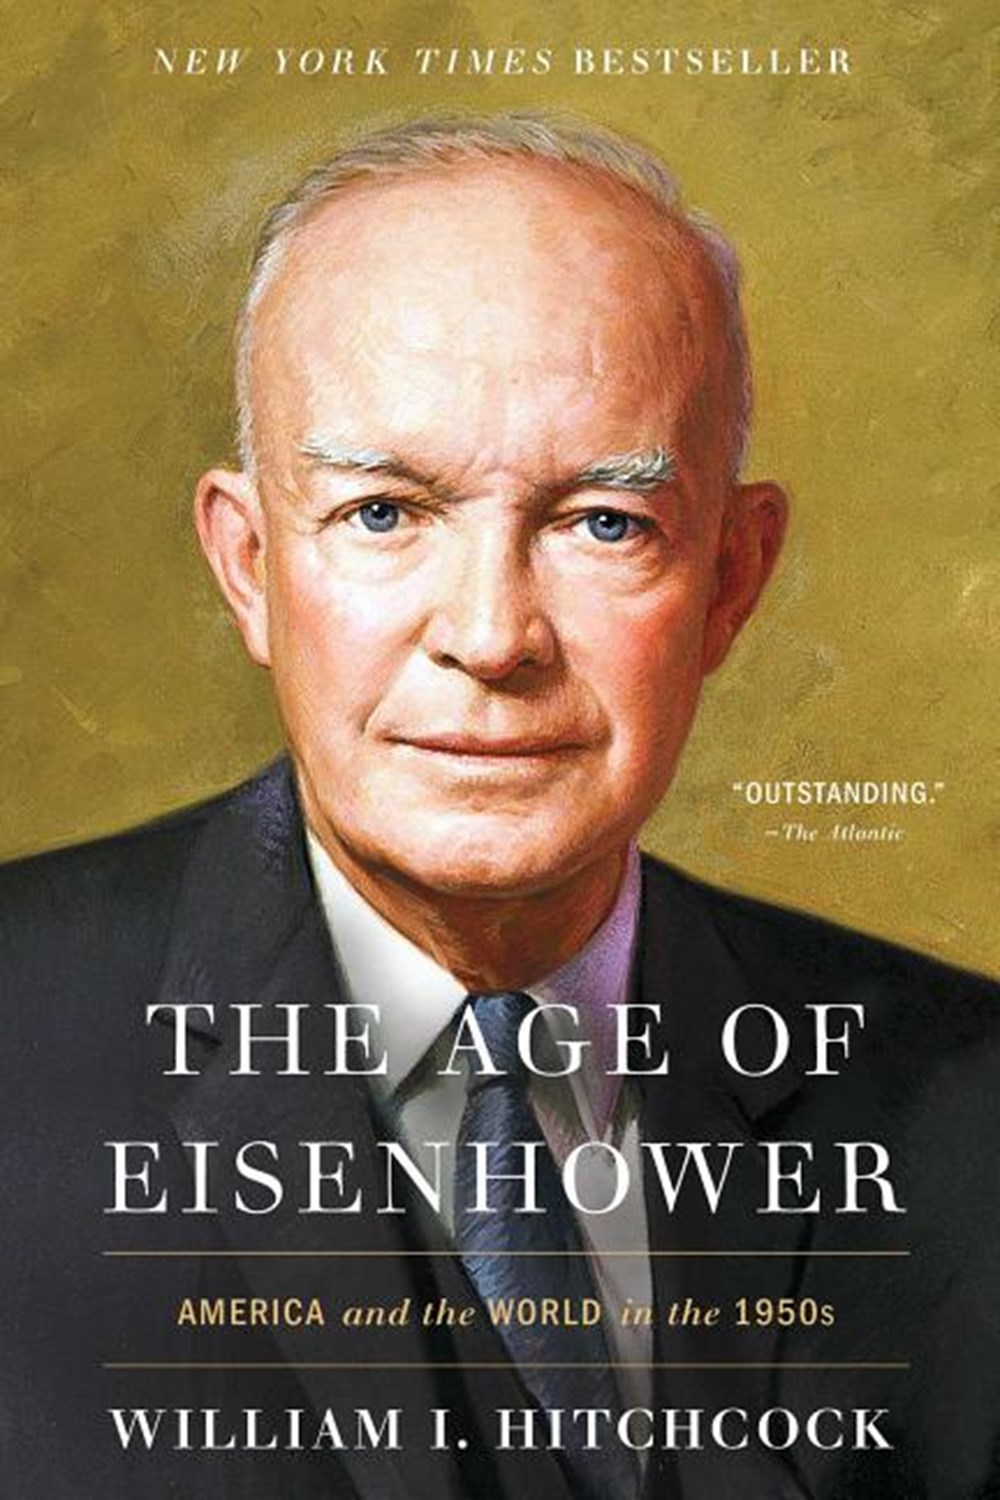 Age of Eisenhower America and the World in the 1950s